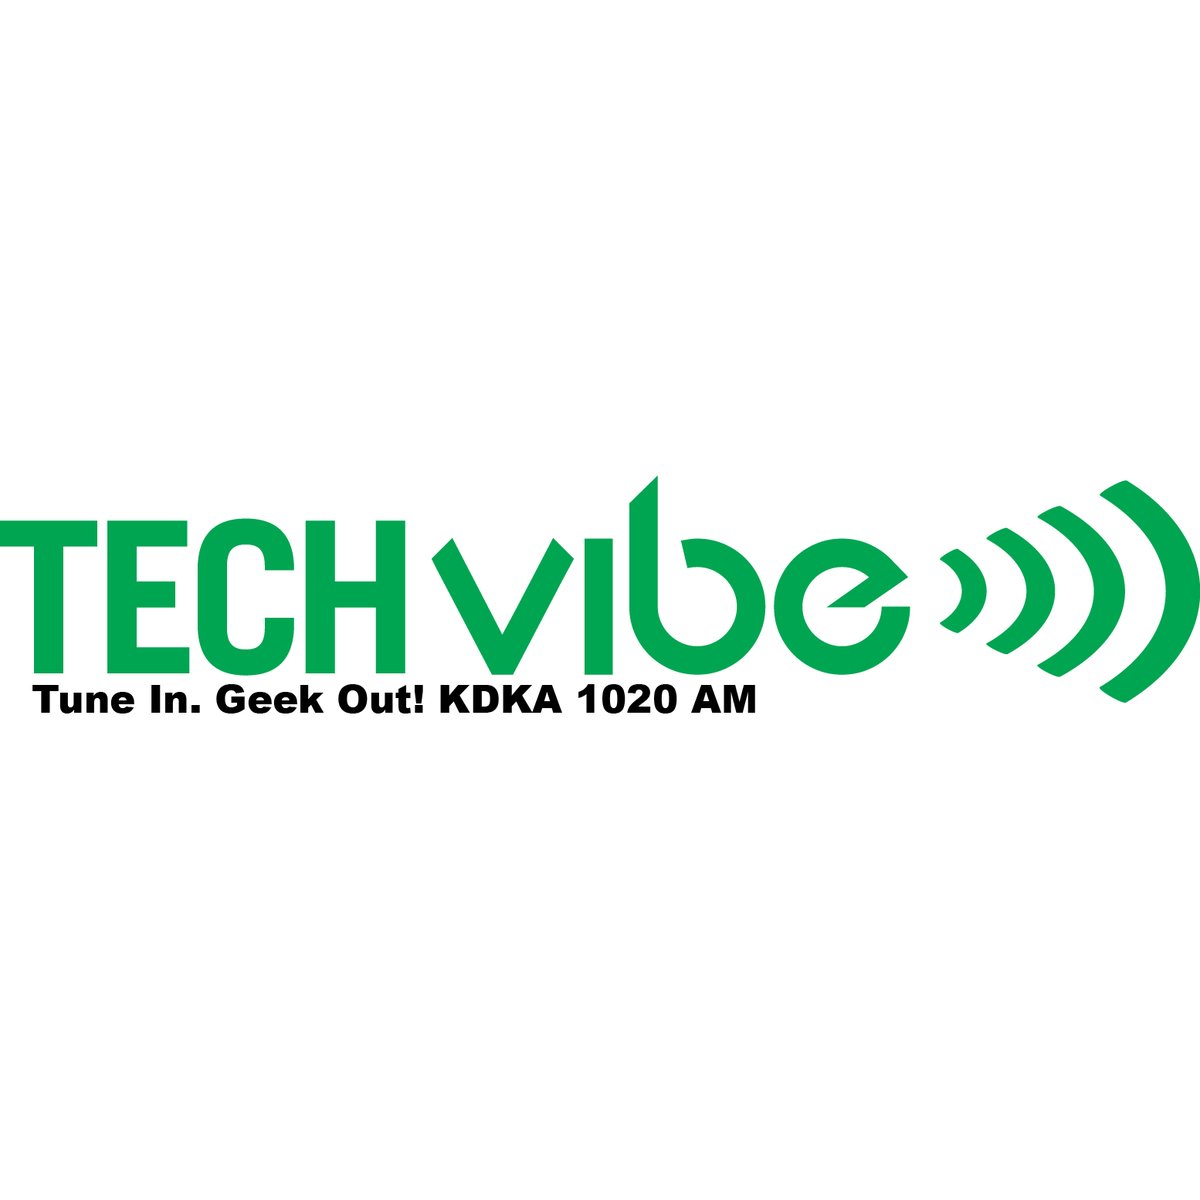 Many thanks to @pghtech's TechVibe for inviting our CEO Sanjiv Singh to tell Near Earth's story. Listen to the interview if you're curious about our mission, partnerships, or plans to make Blackhawk Helicopters fight forest fires autonomously! pghtech.libsyn.com/tvr-92522-sanj…